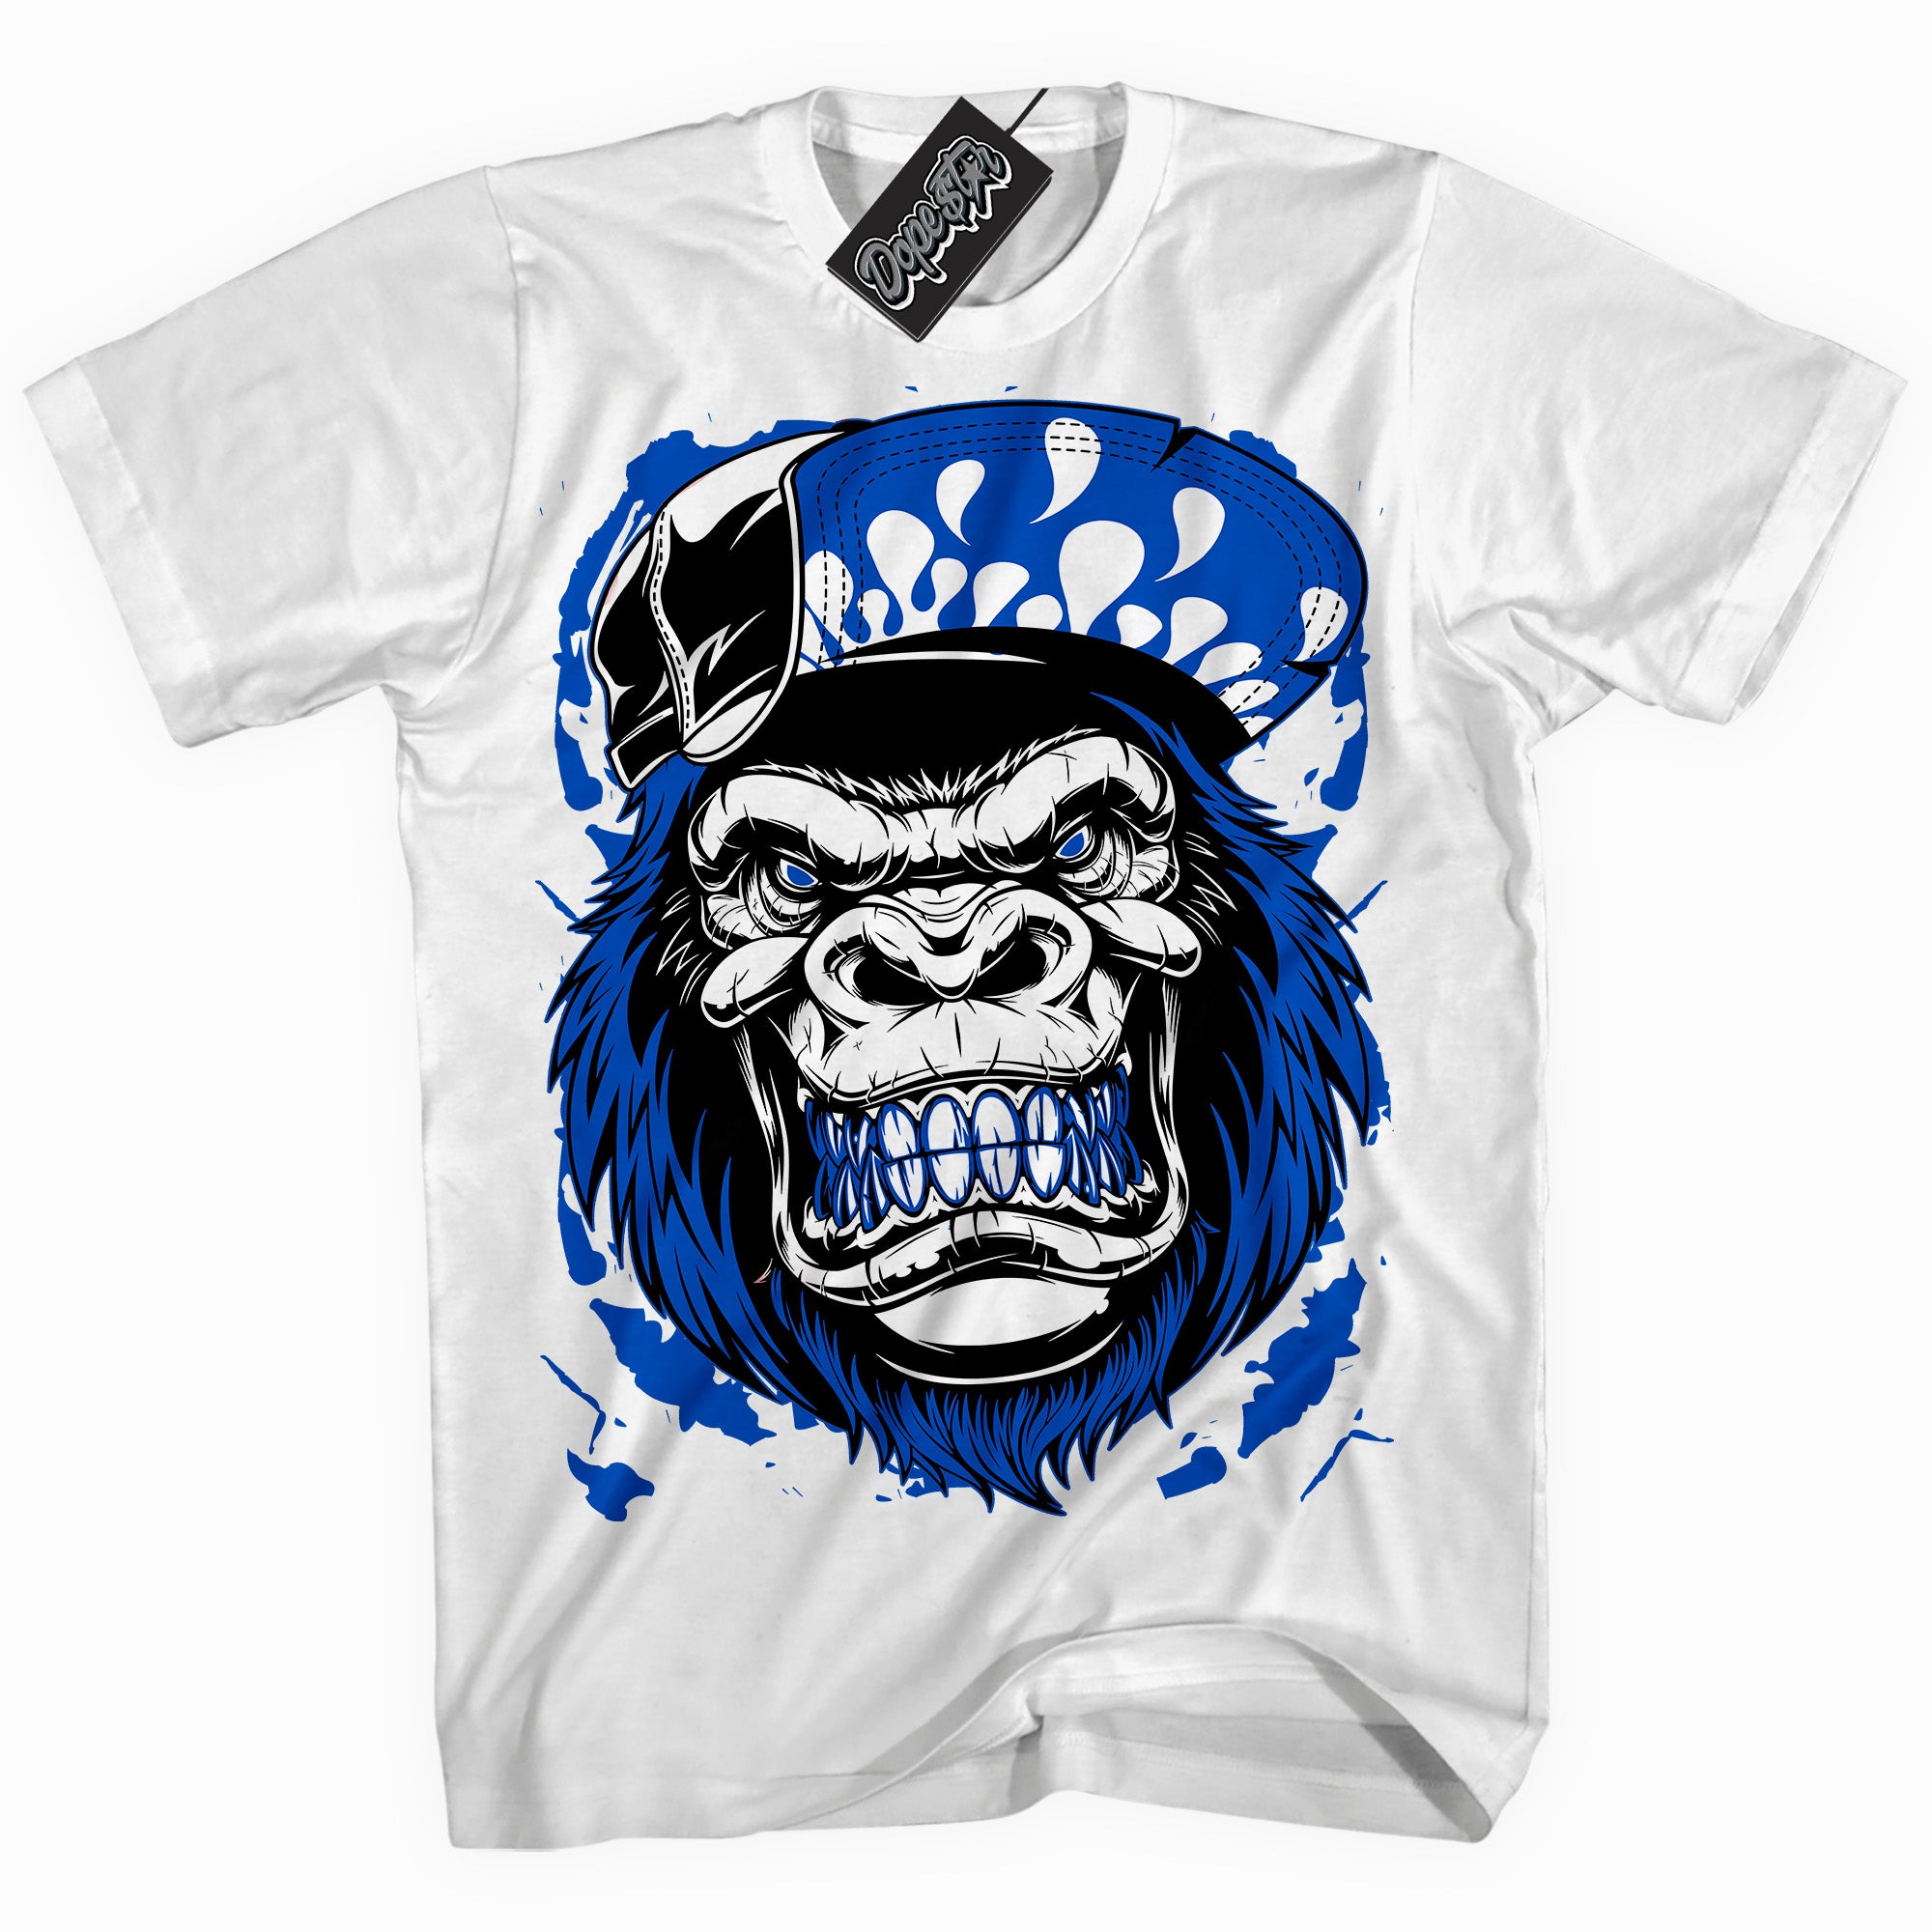 Cool White graphic tee with " Gorilla Beast " design, that perfectly matches Royal Reimagined 1s sneakers 